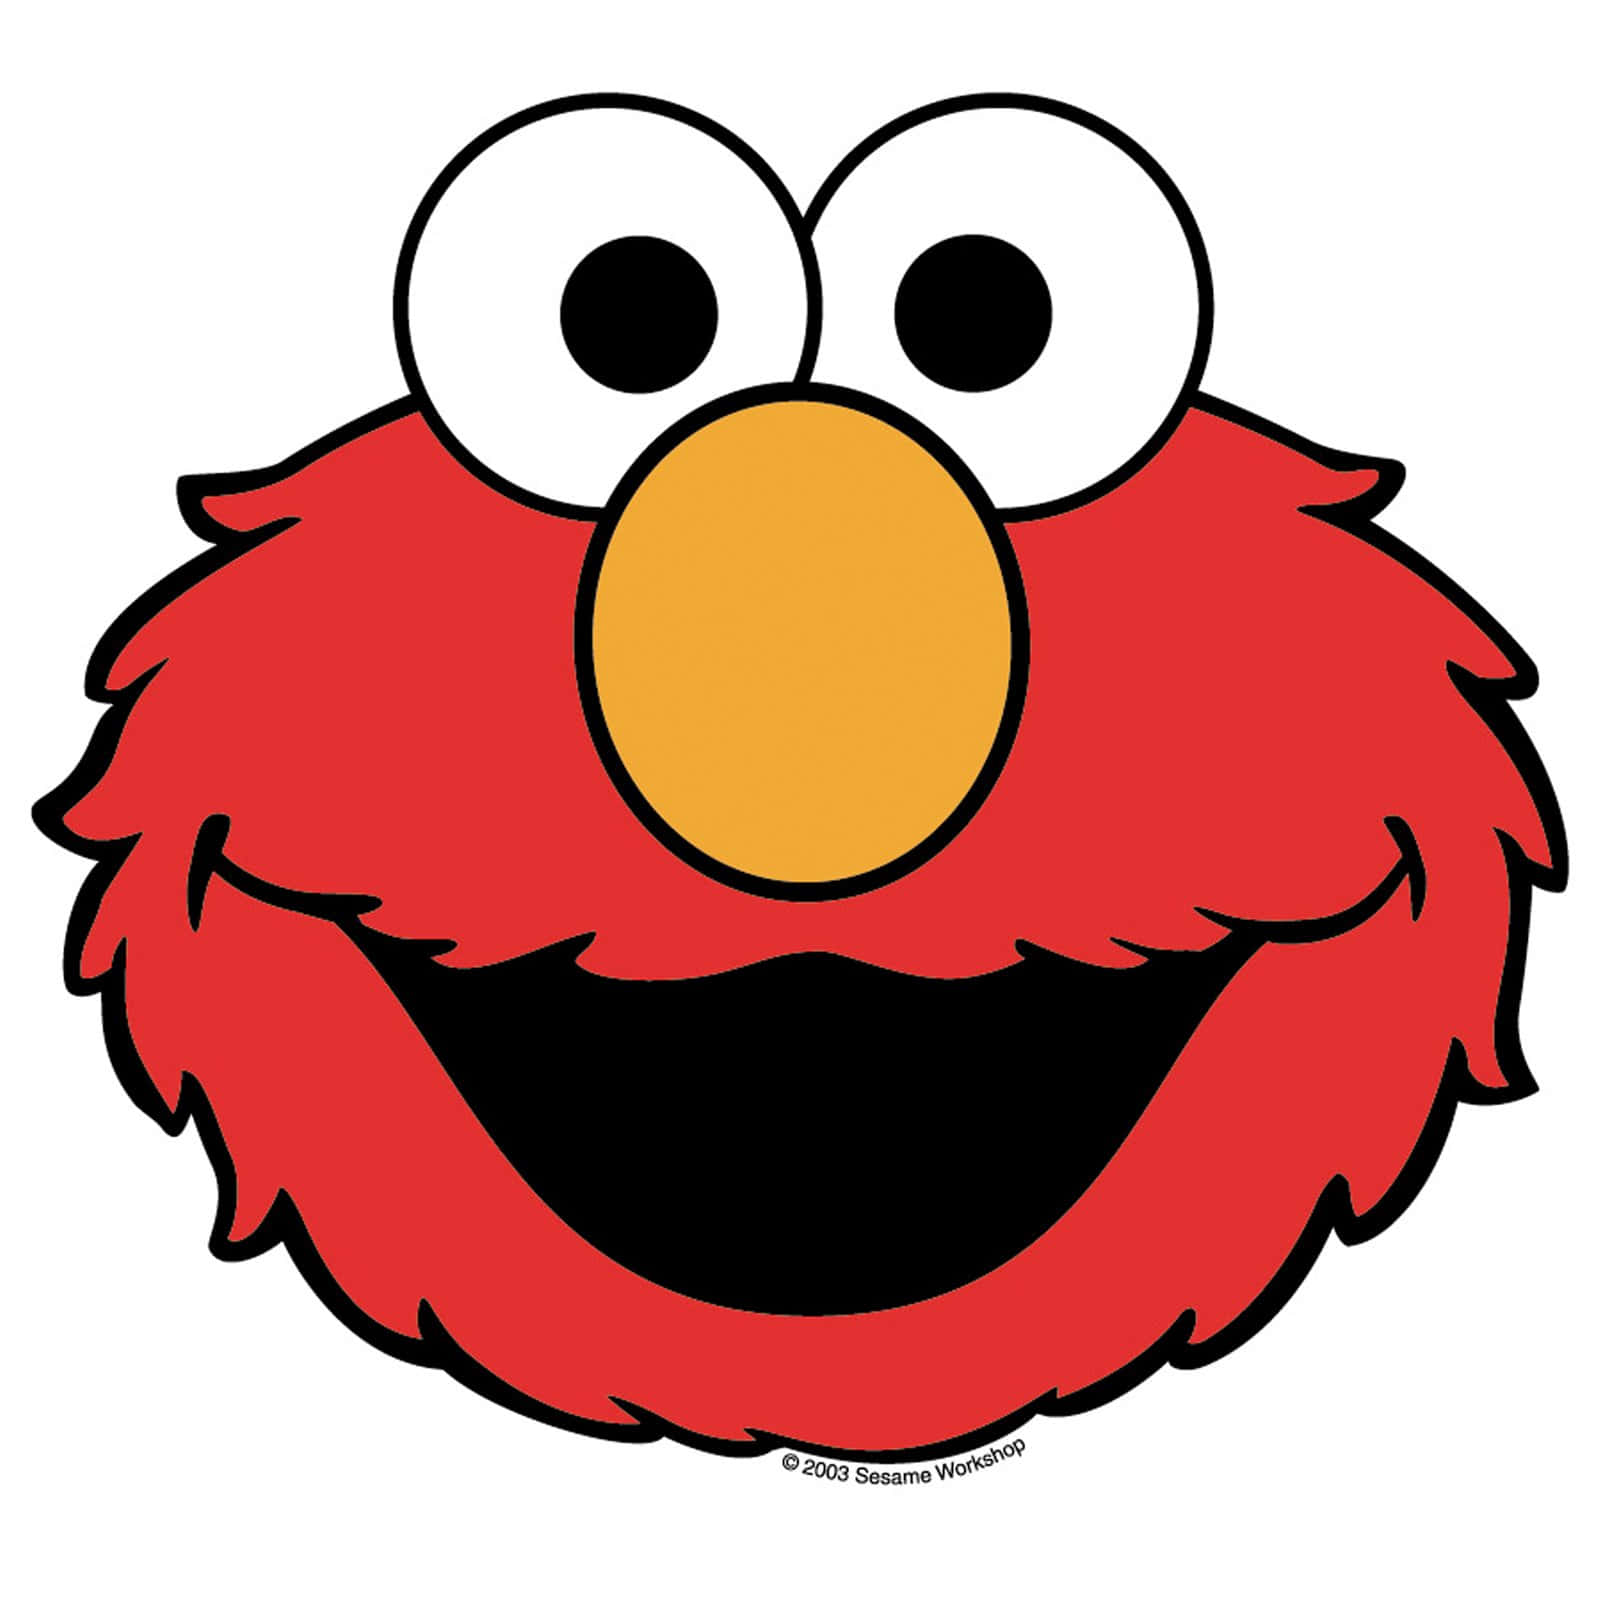 Elmo Smiling on a Colorful Background